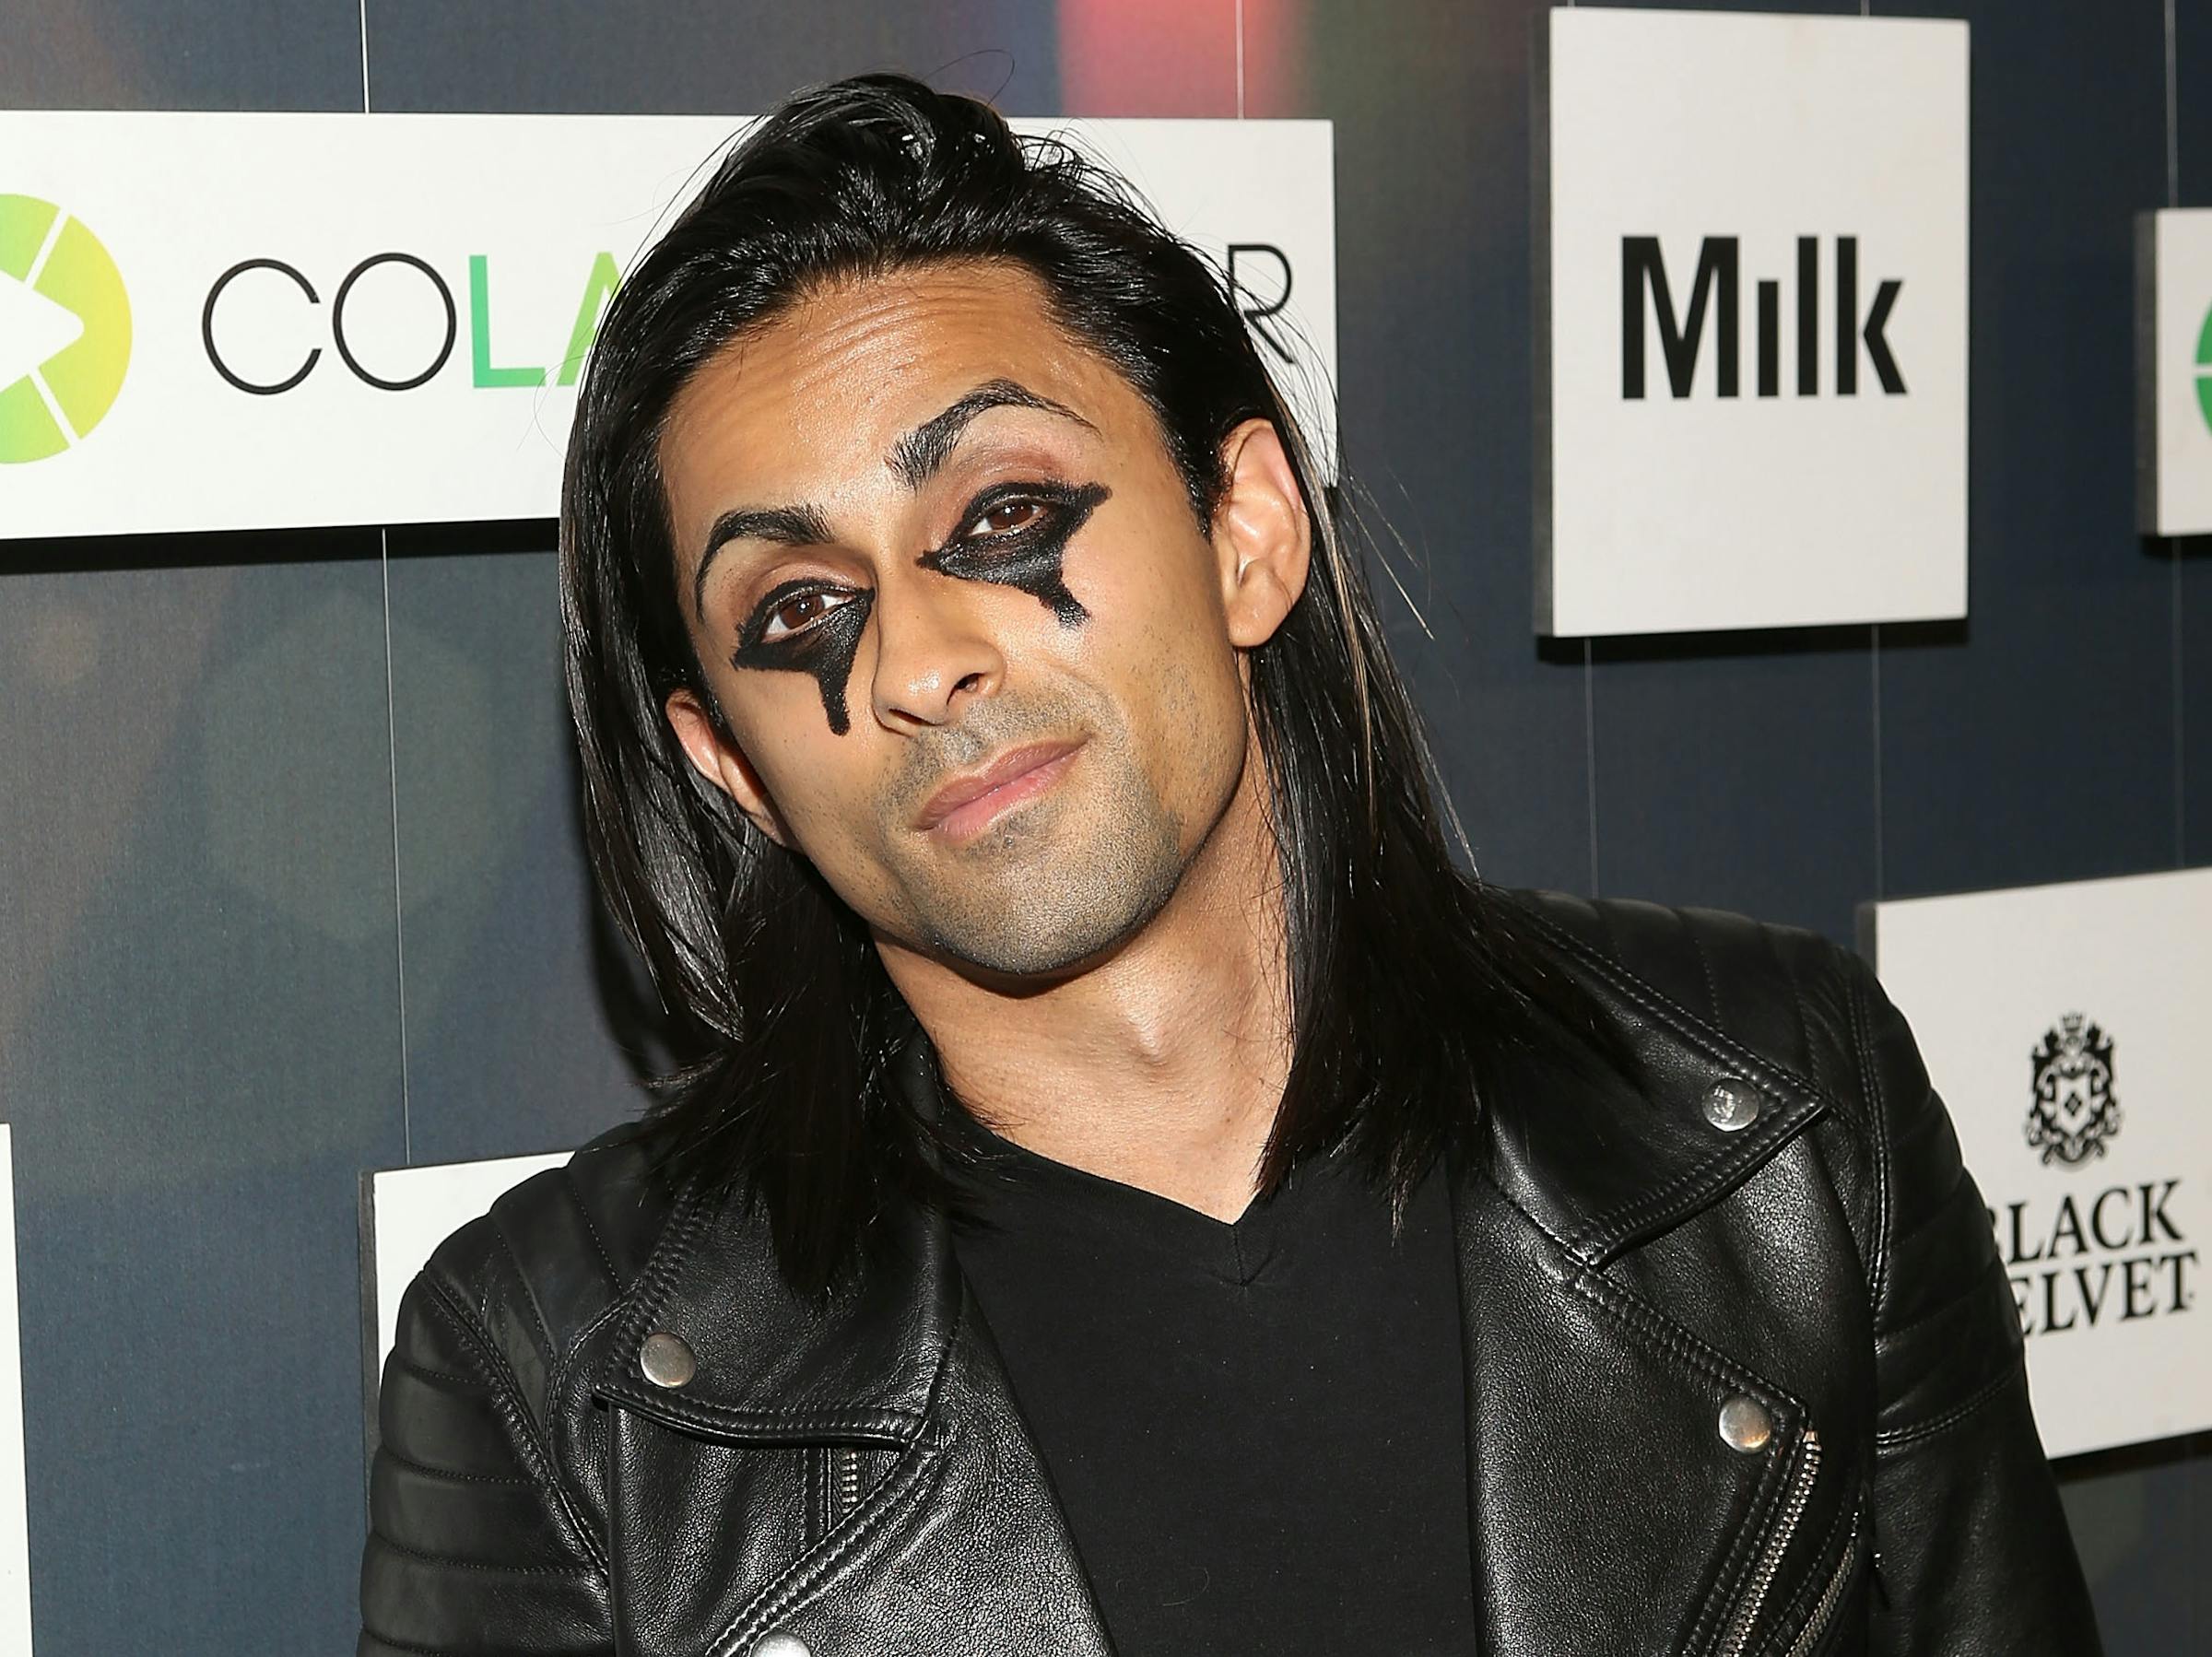 The 37-year old son of father (?) and mother(?) Adi Shankar in 2022 photo. Adi Shankar earned a  million dollar salary - leaving the net worth at  million in 2022